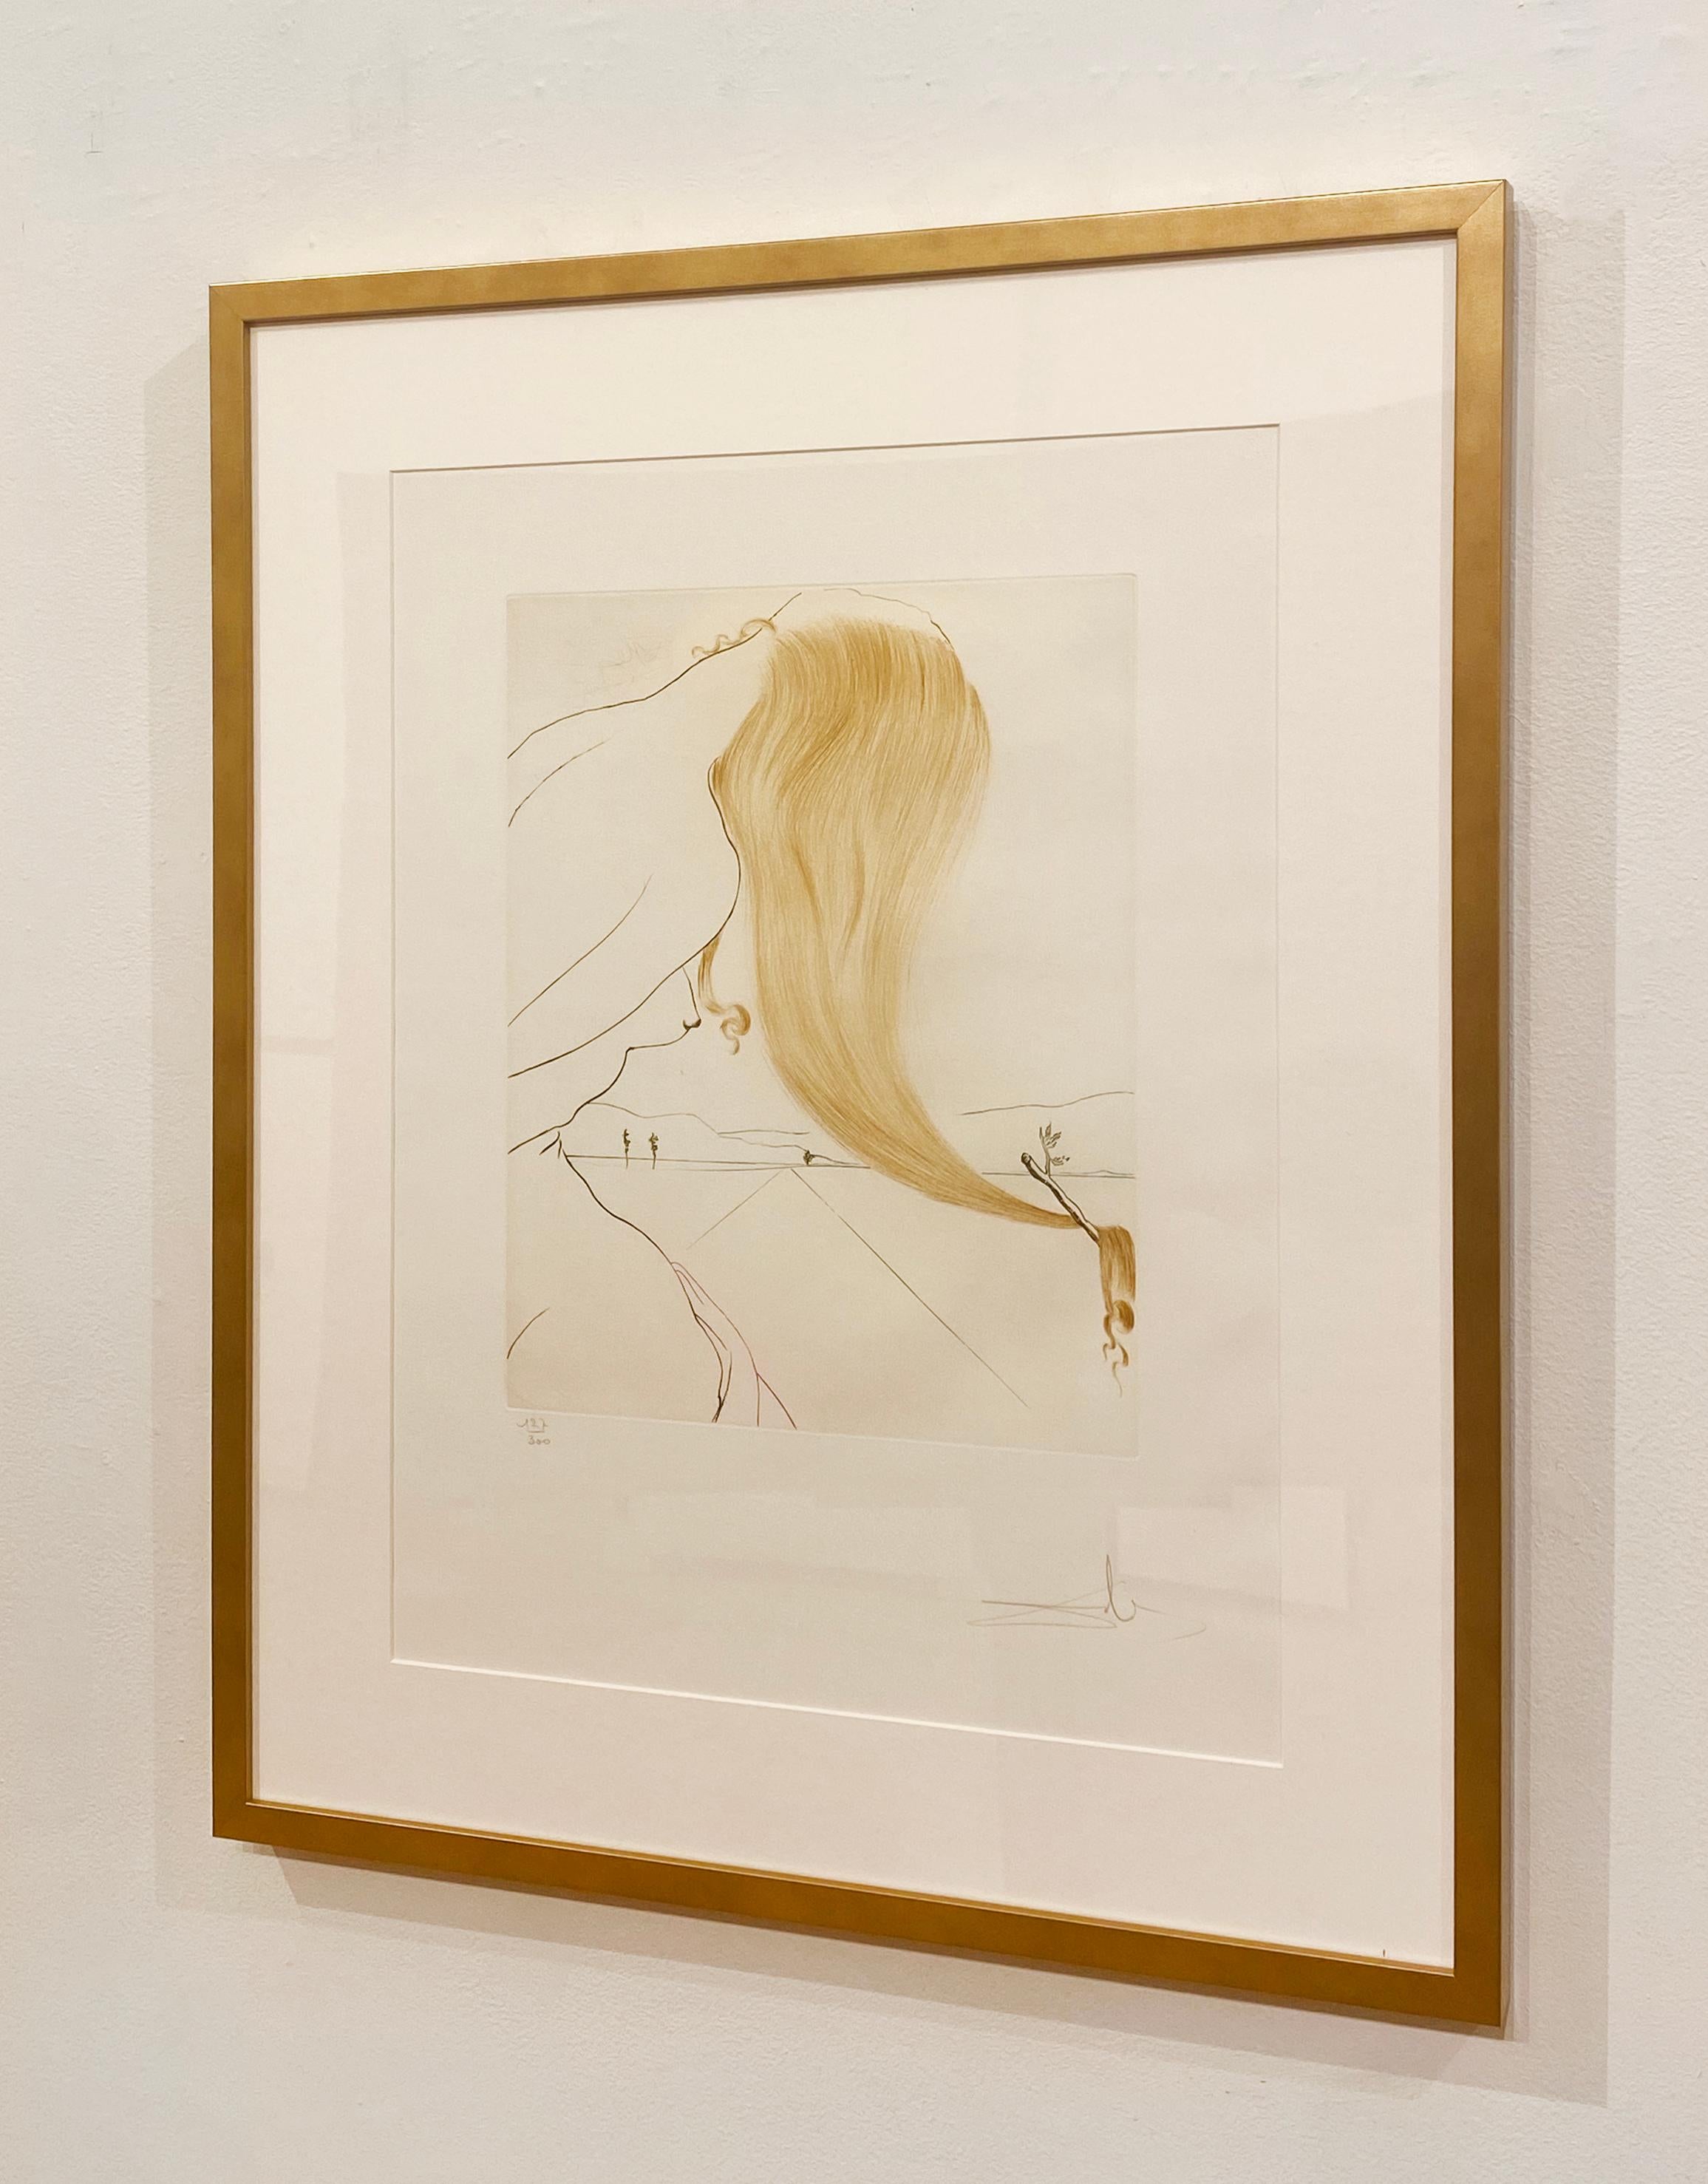 Artist:  Dali, Salvador
Title:  The Golden Fleece
Series:  Aranella
Date:  1974
Medium:  drypoint printed in color
Signature:  Pencil signed
Edition:  127 / 300
Literature:  AF 91
Provenance:  Acquired Directly from the Artist, Private Collection,